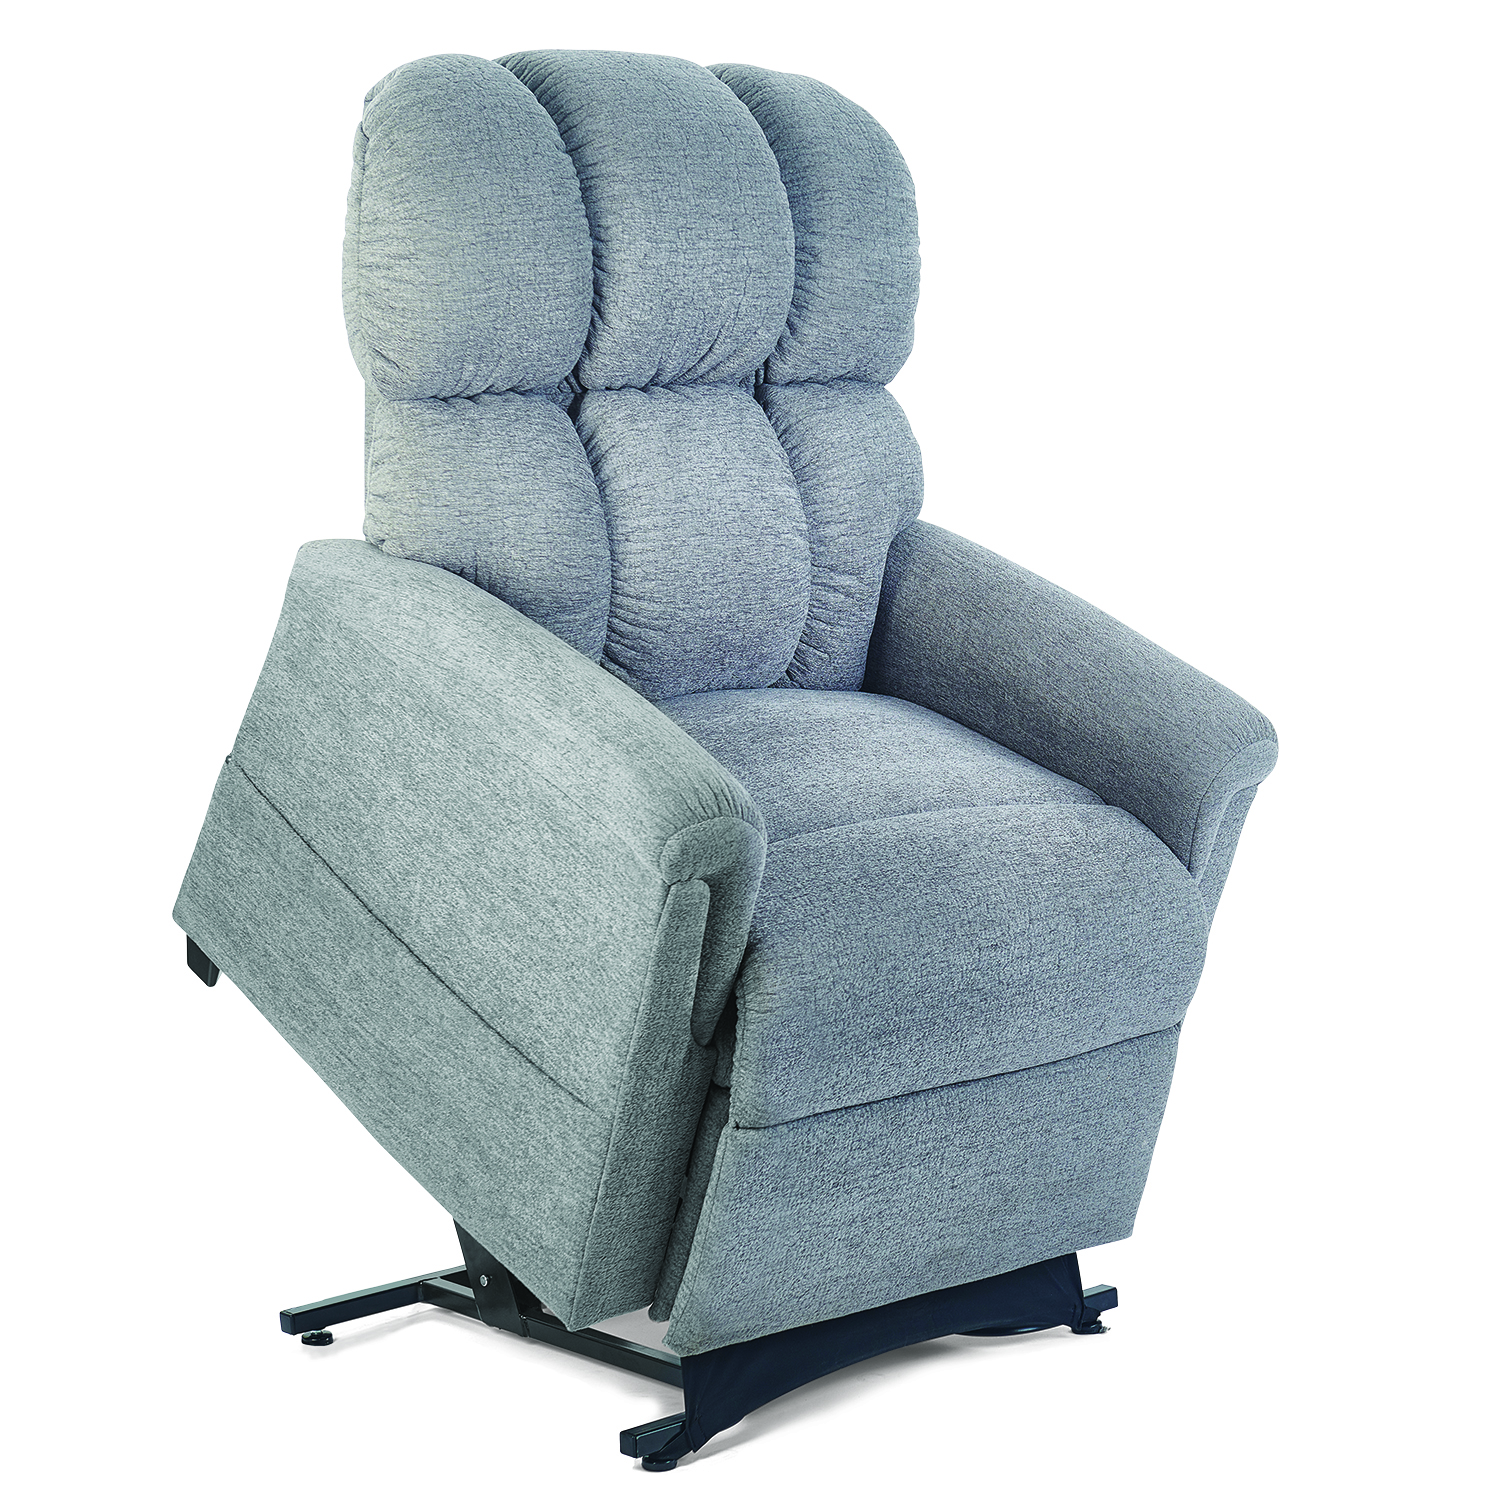 Medical Recliner Chairs